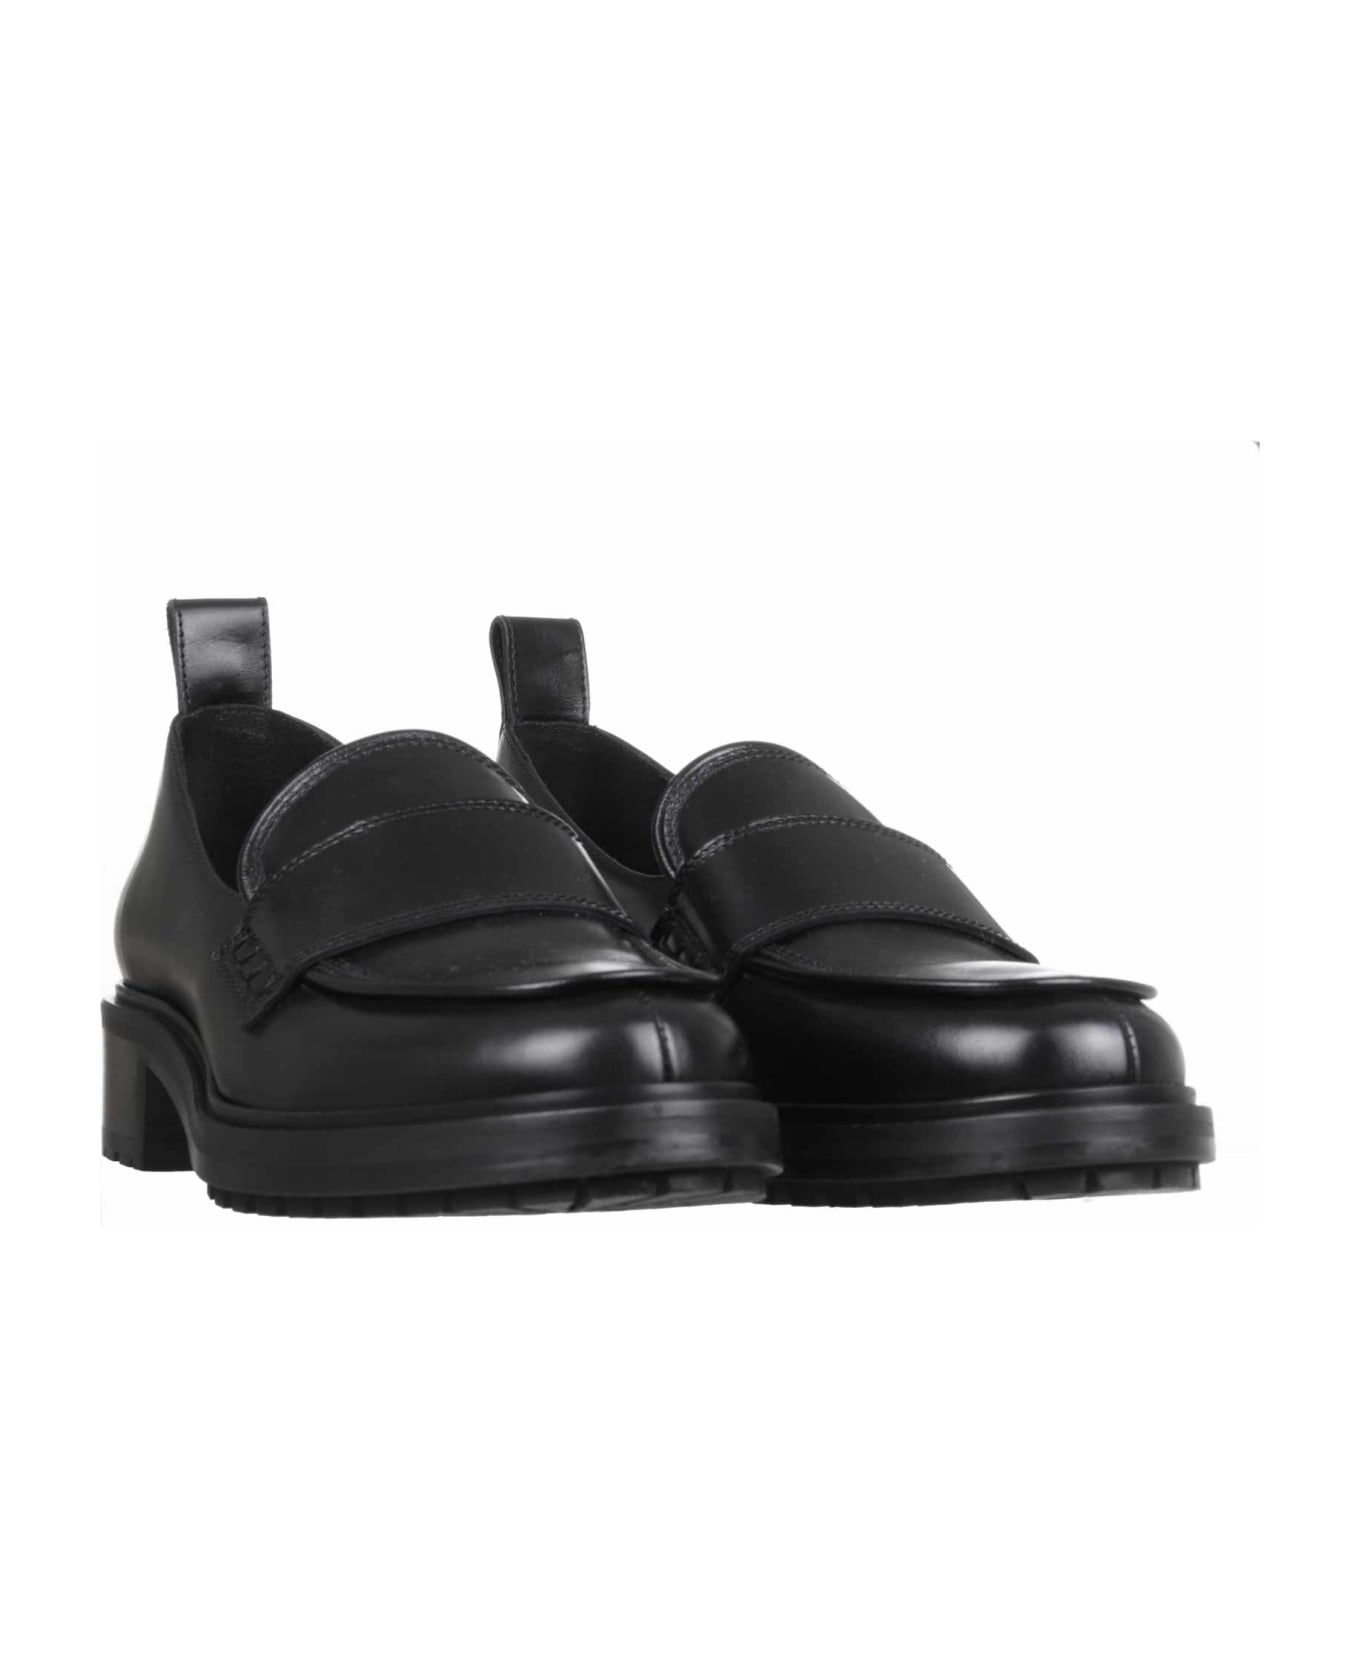 aeyde Black Ruth Loafers - Black